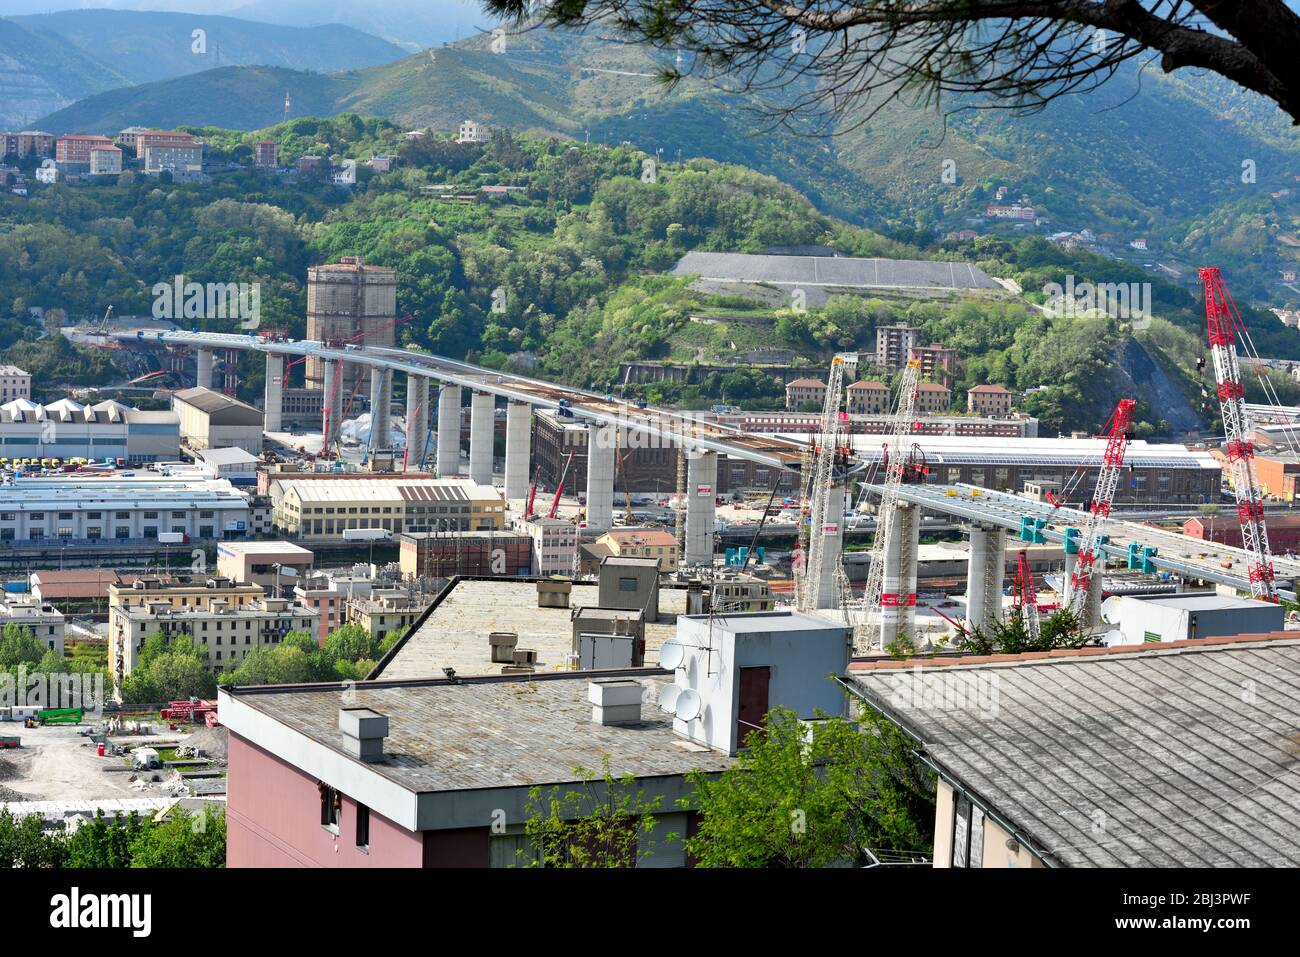 latest reconstruction work on the new highway bridge (ex morandi) which collapsed in August 2018 April 26 2020 Genoa Italy Stock Photo